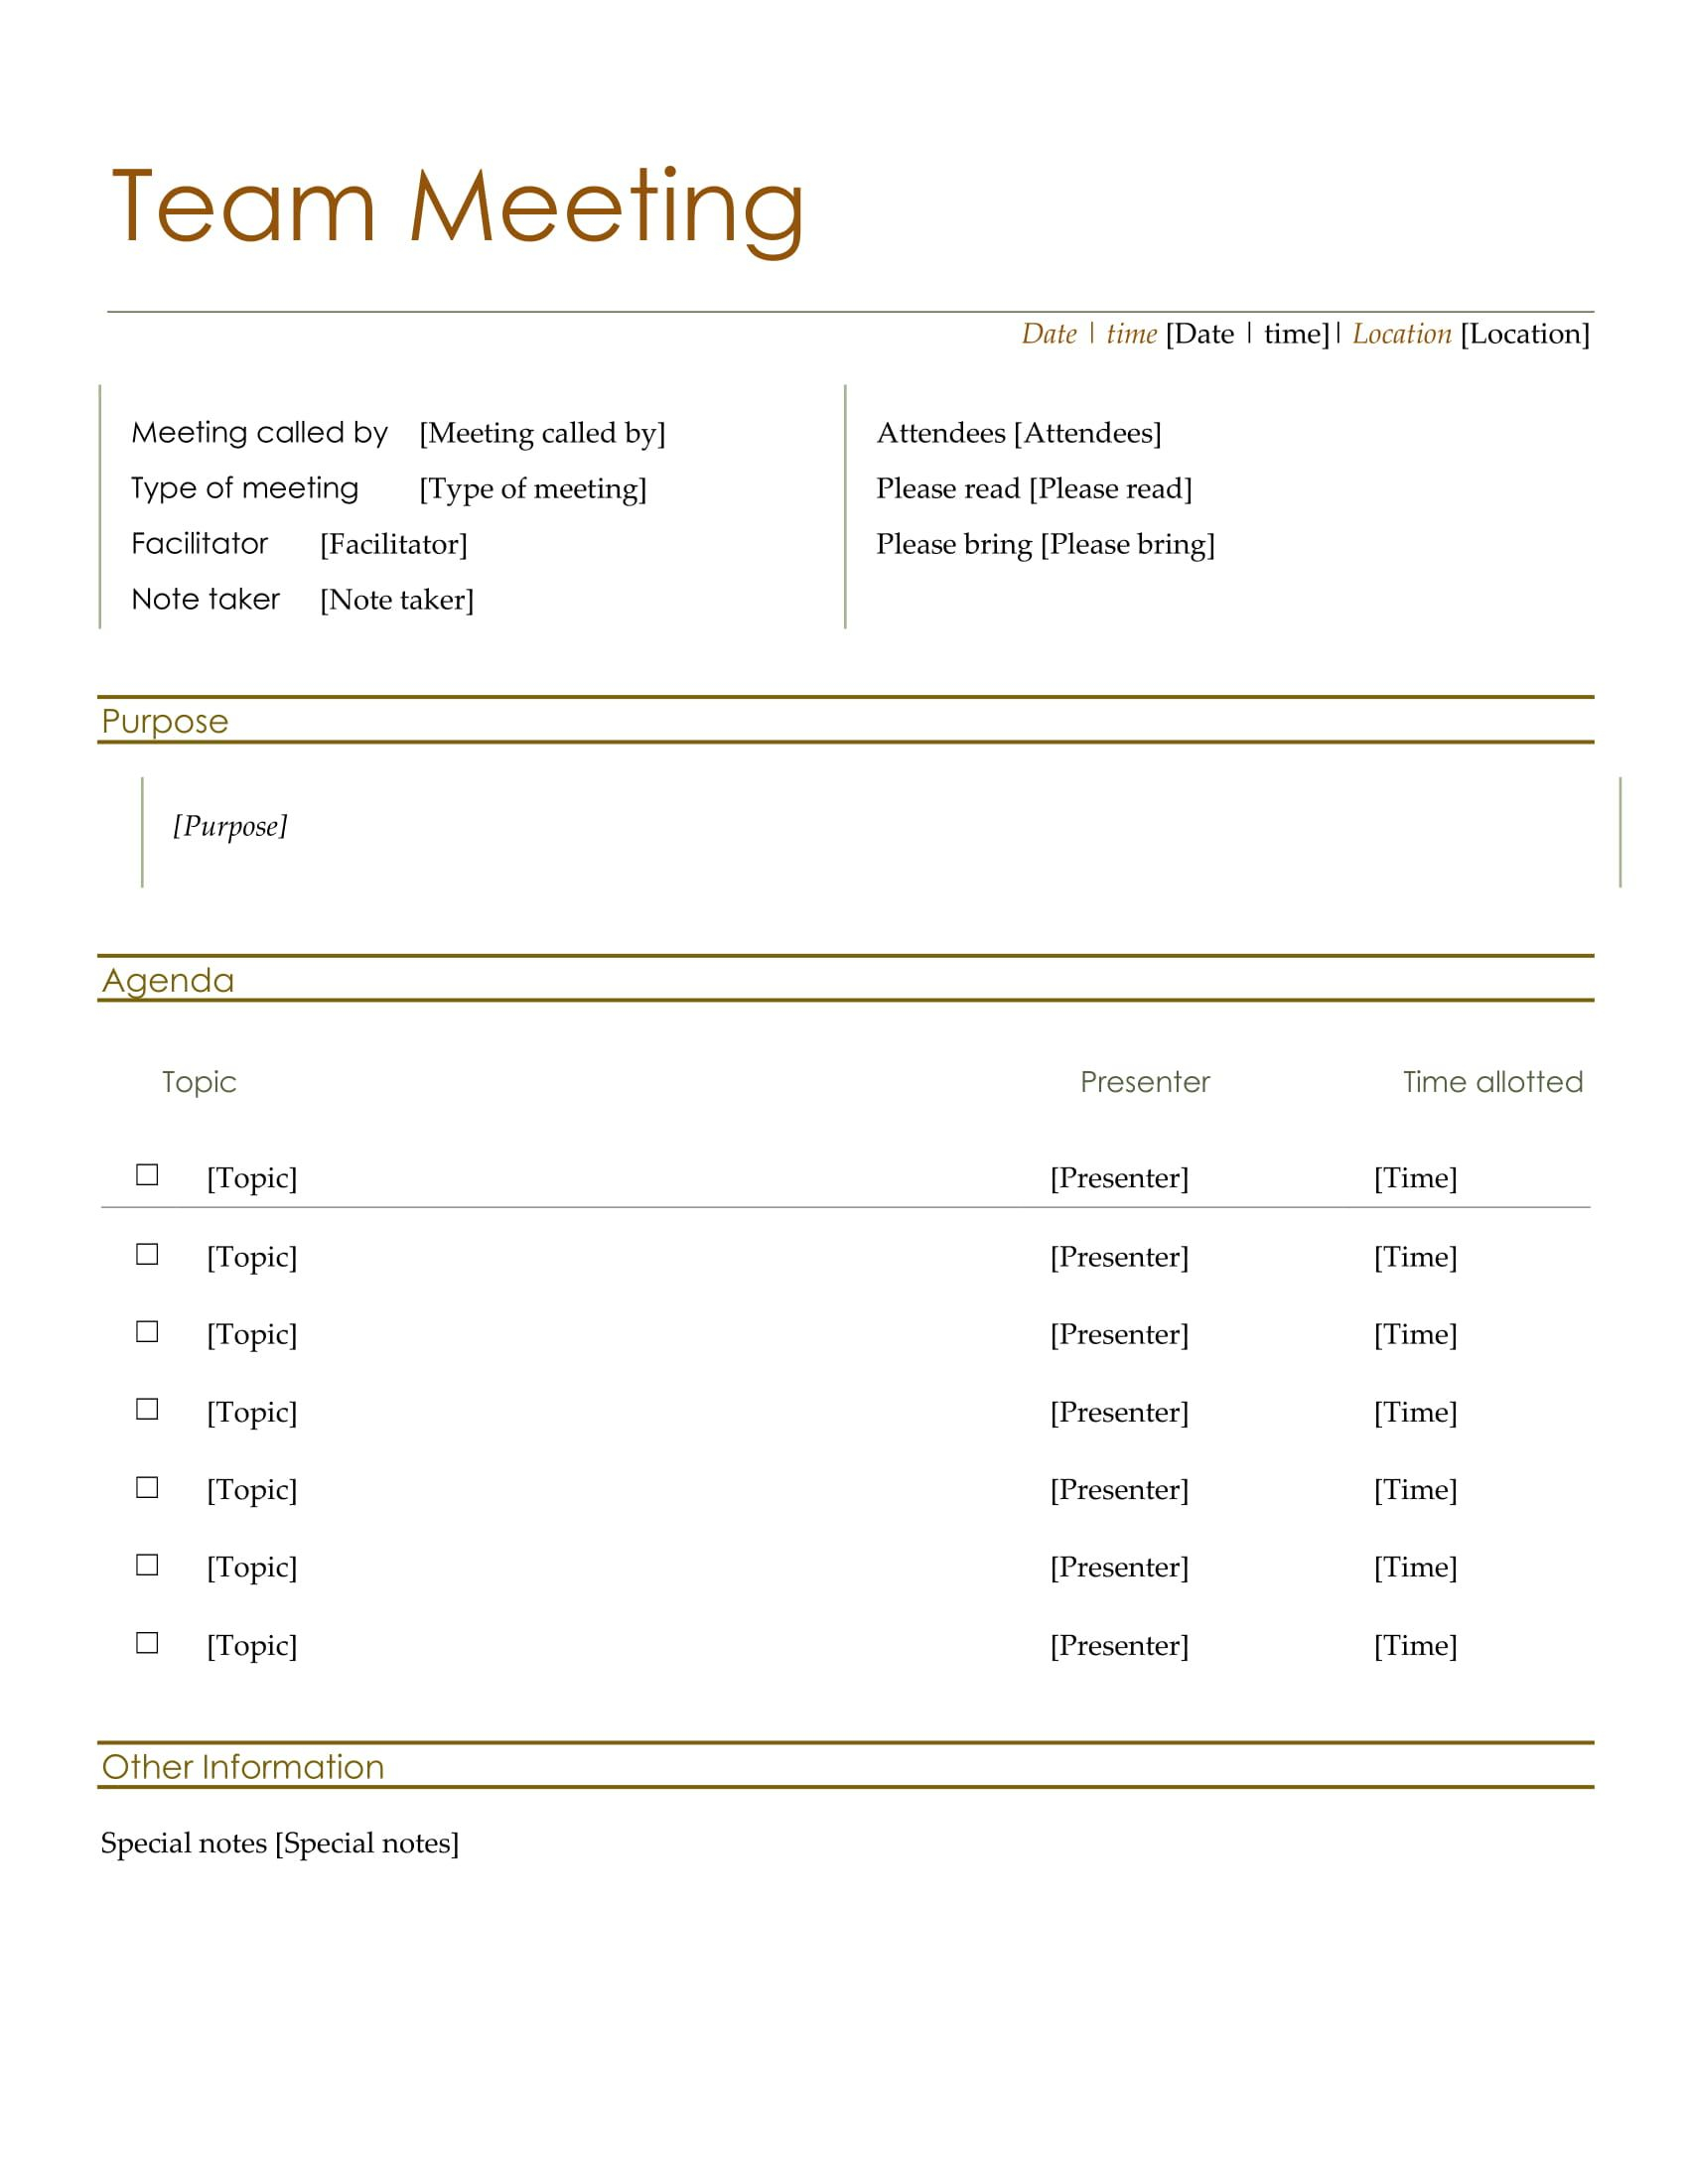 Meeting Request Template